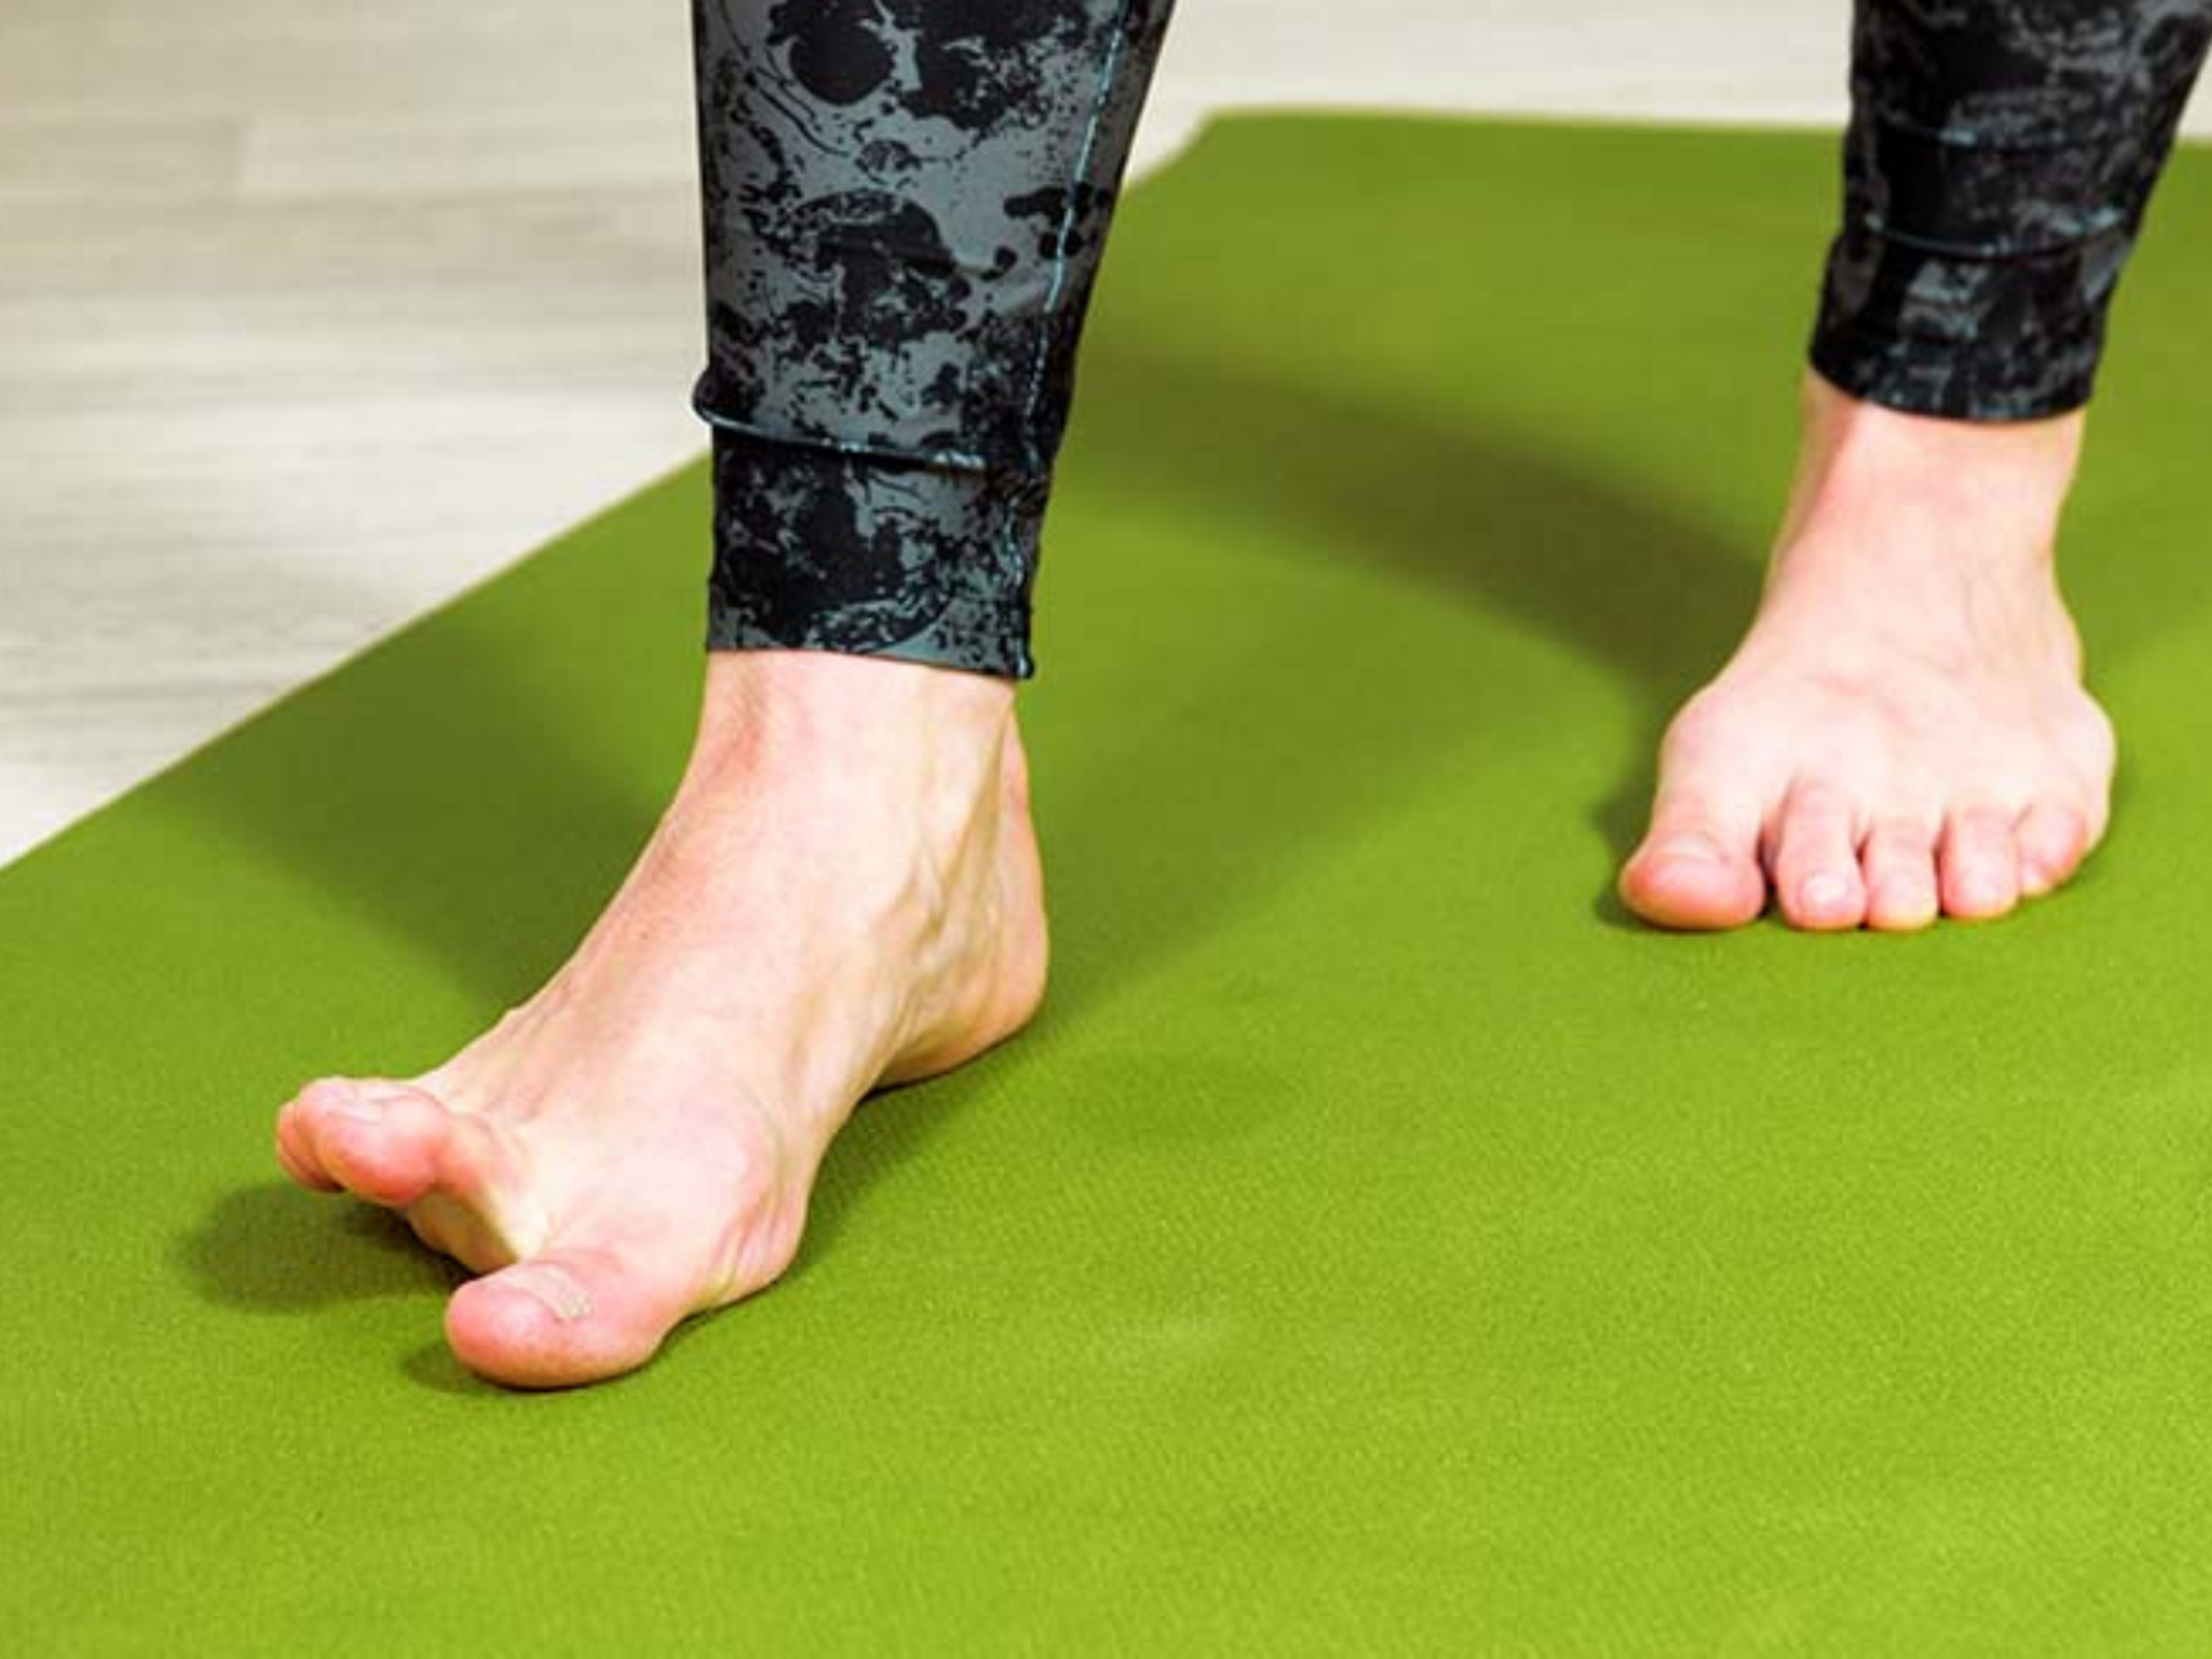 Foot exercise for plantar fasciitis recovery.